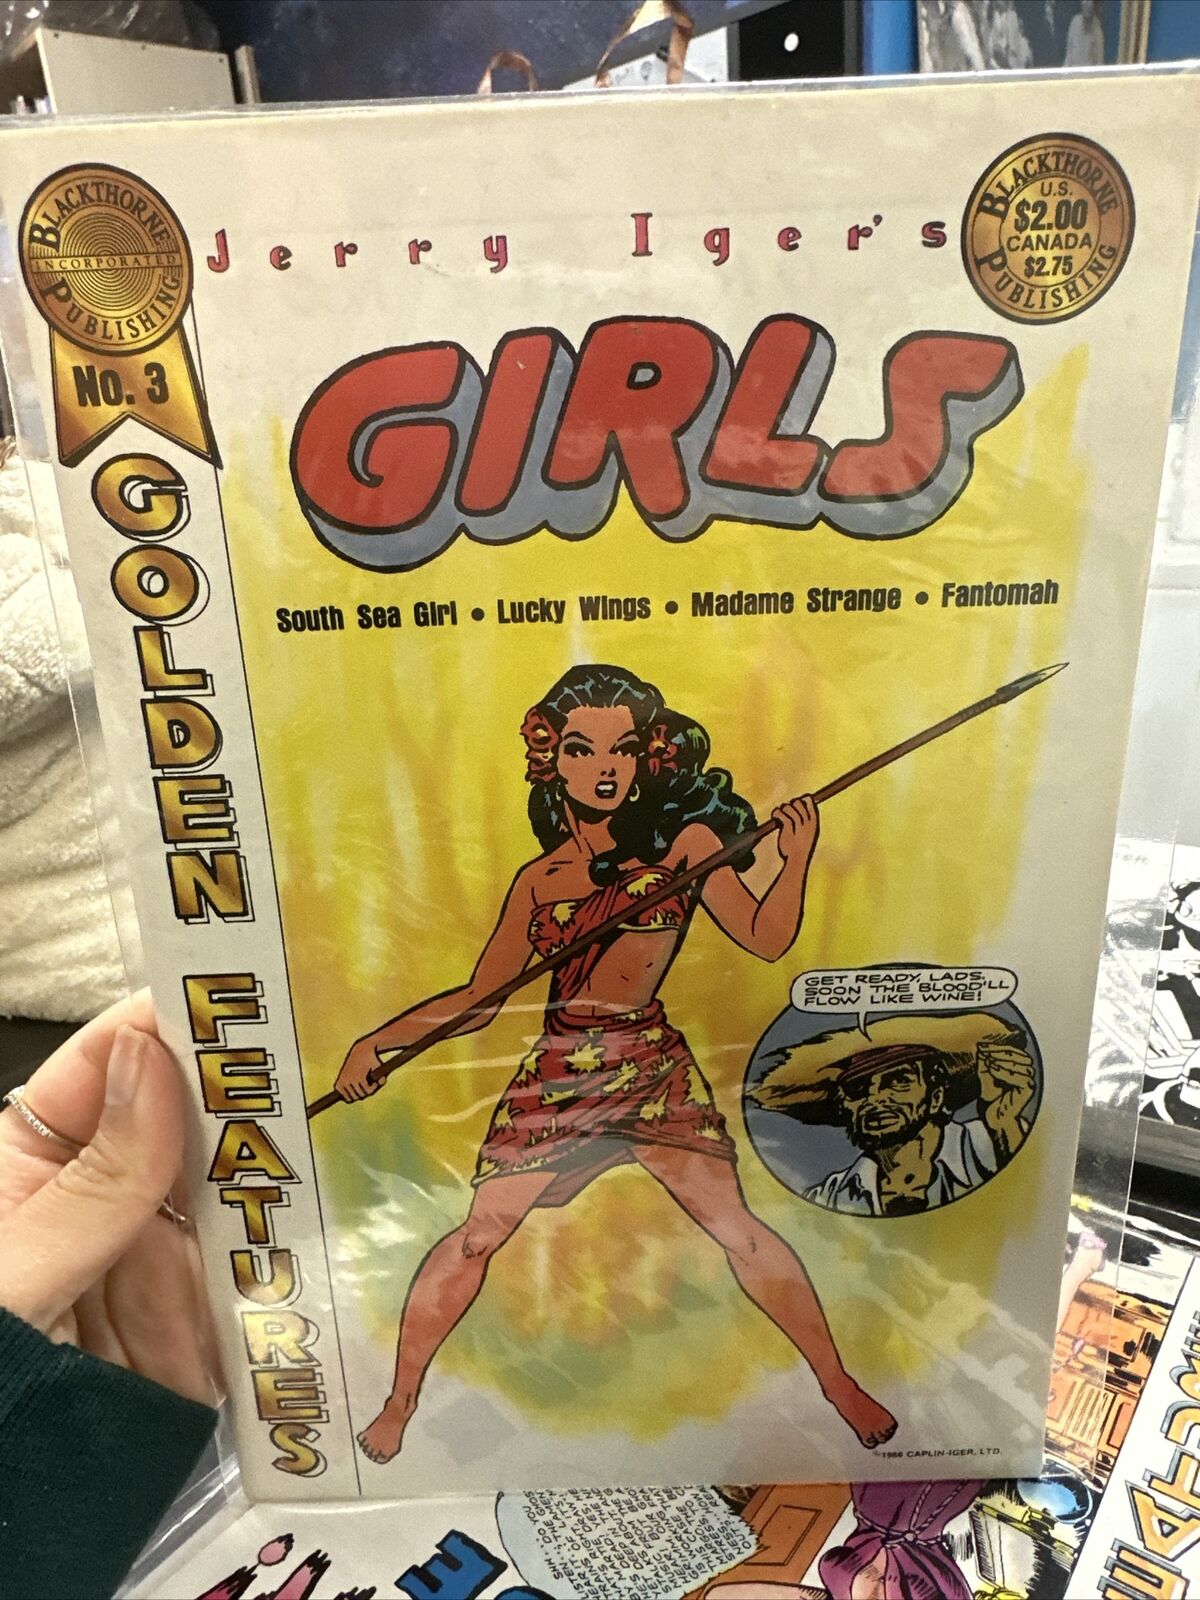 BLACKTHORNE PUBLISHING JERRY IGER'S - GIRLS ISSUE #3 A15